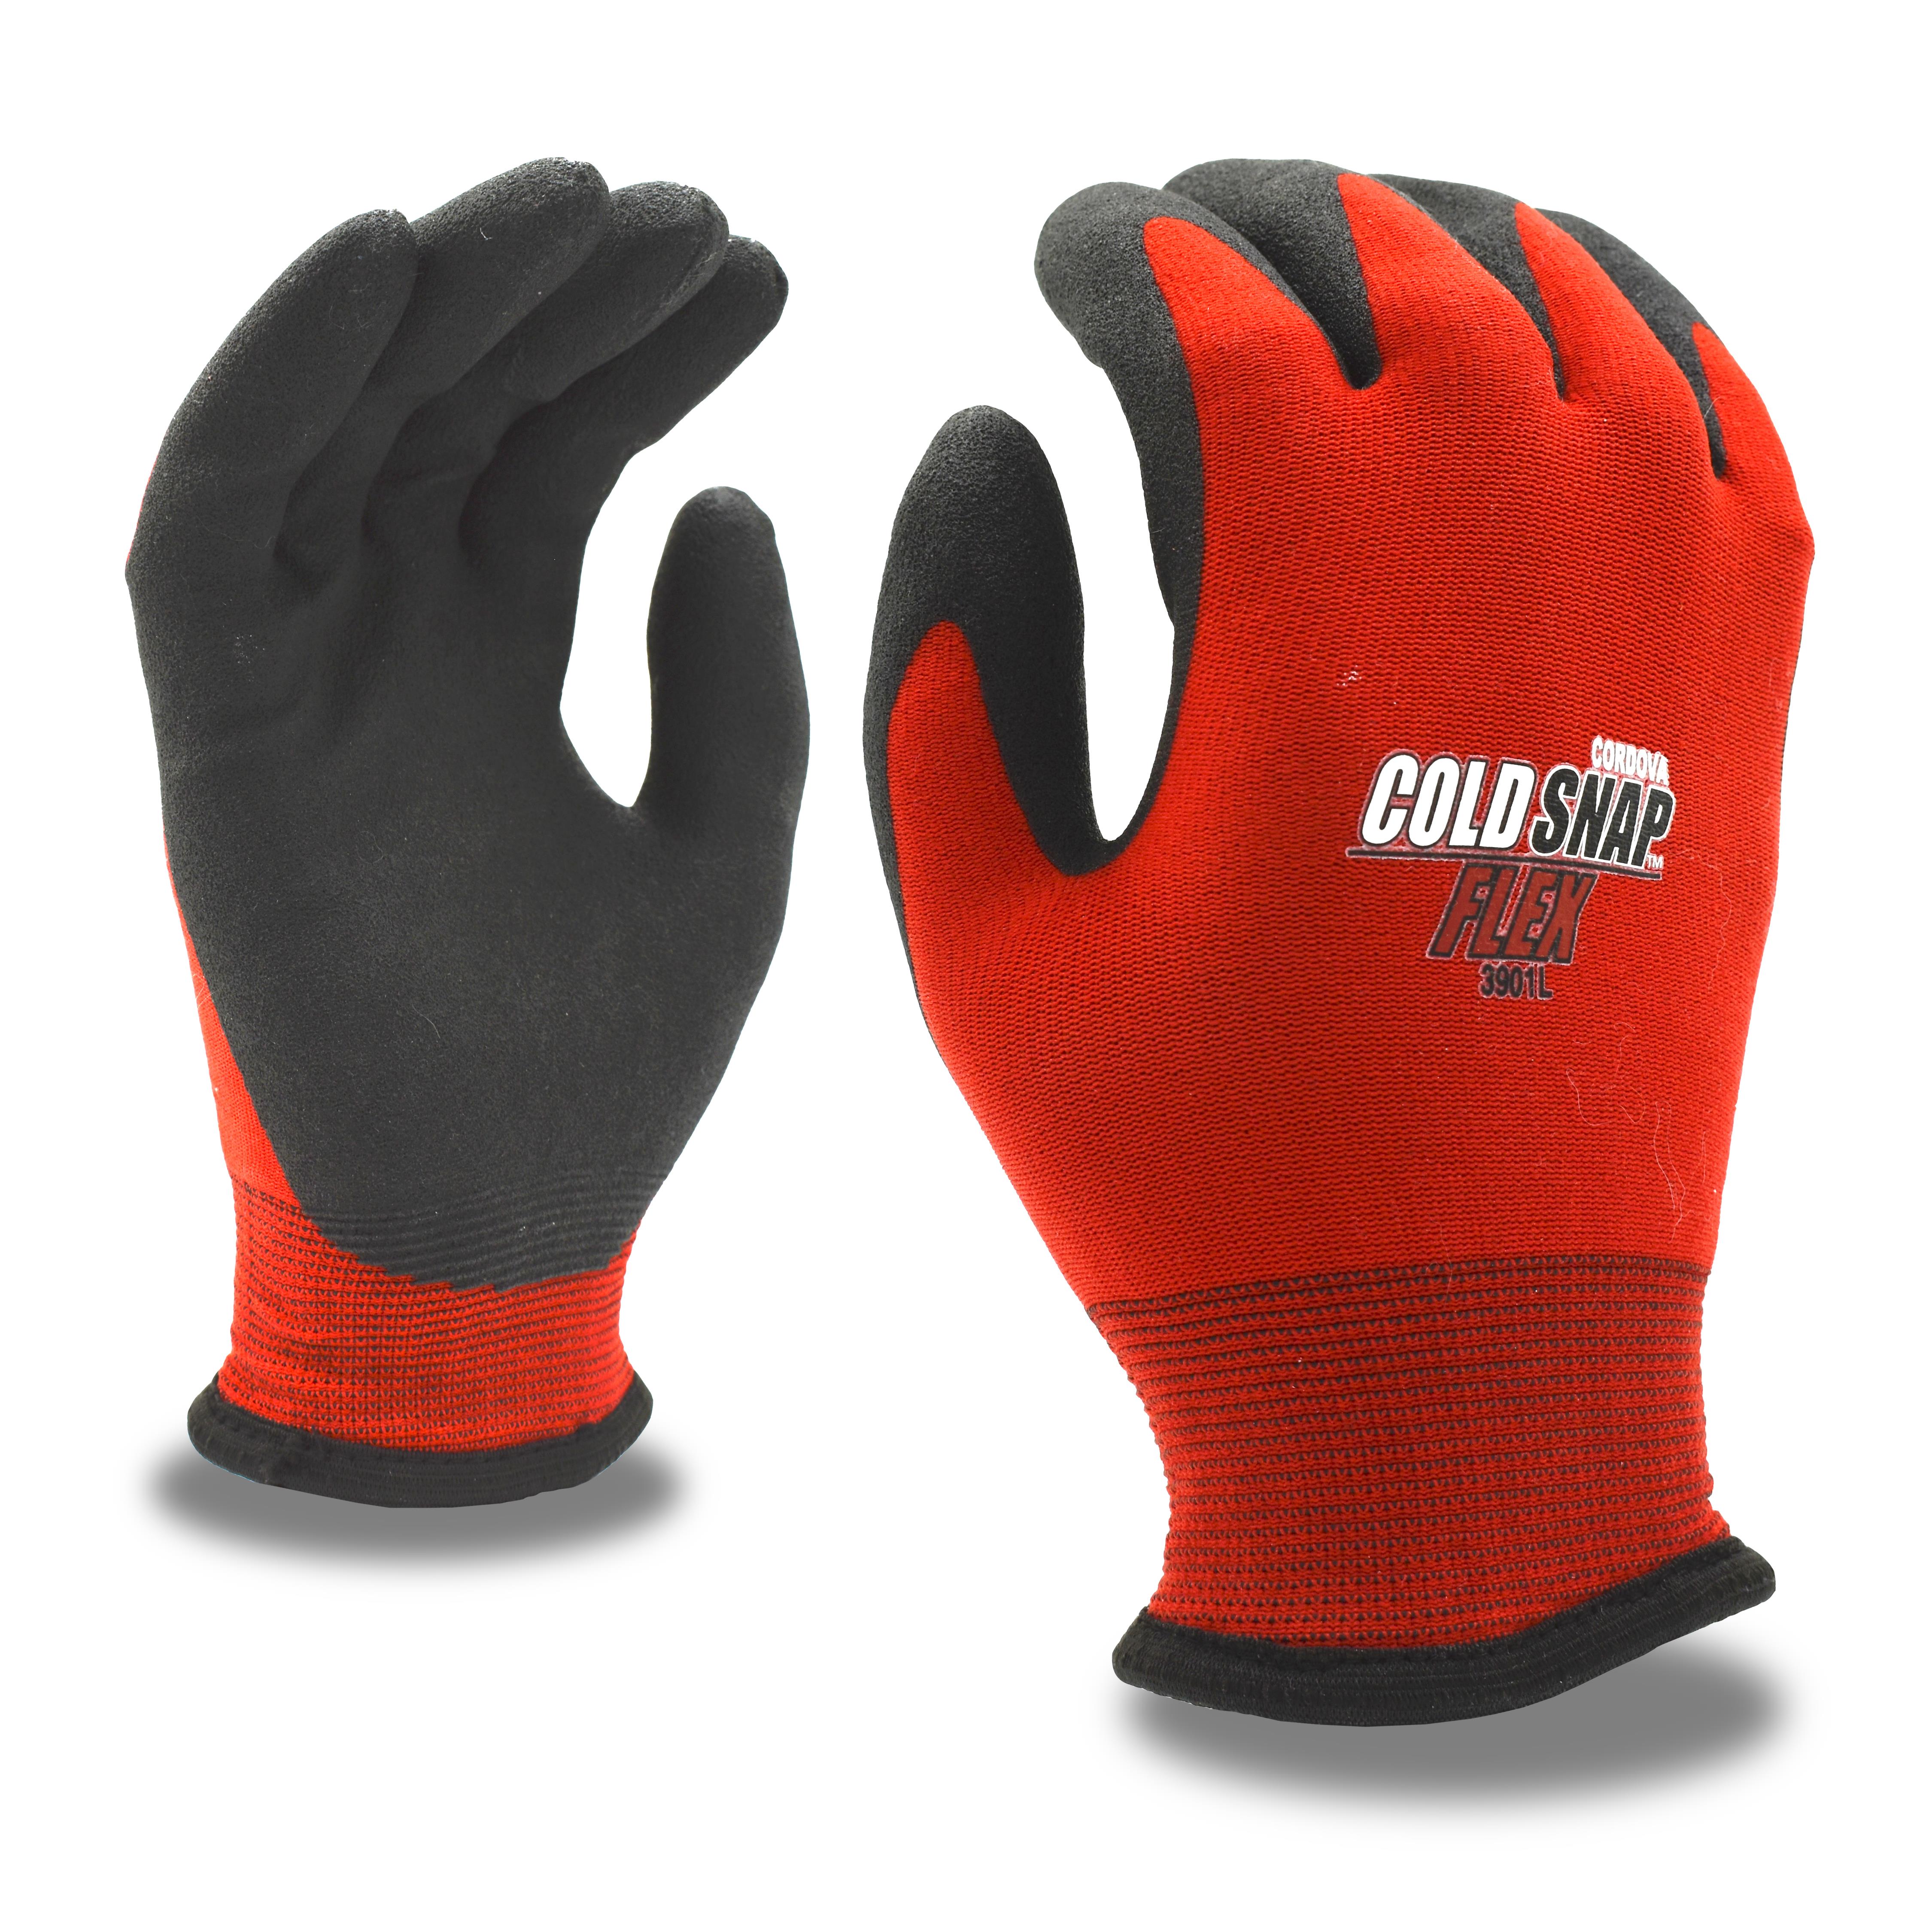 COLD SNAP FLEX FOAM PVC PALM COATED - Tagged Gloves